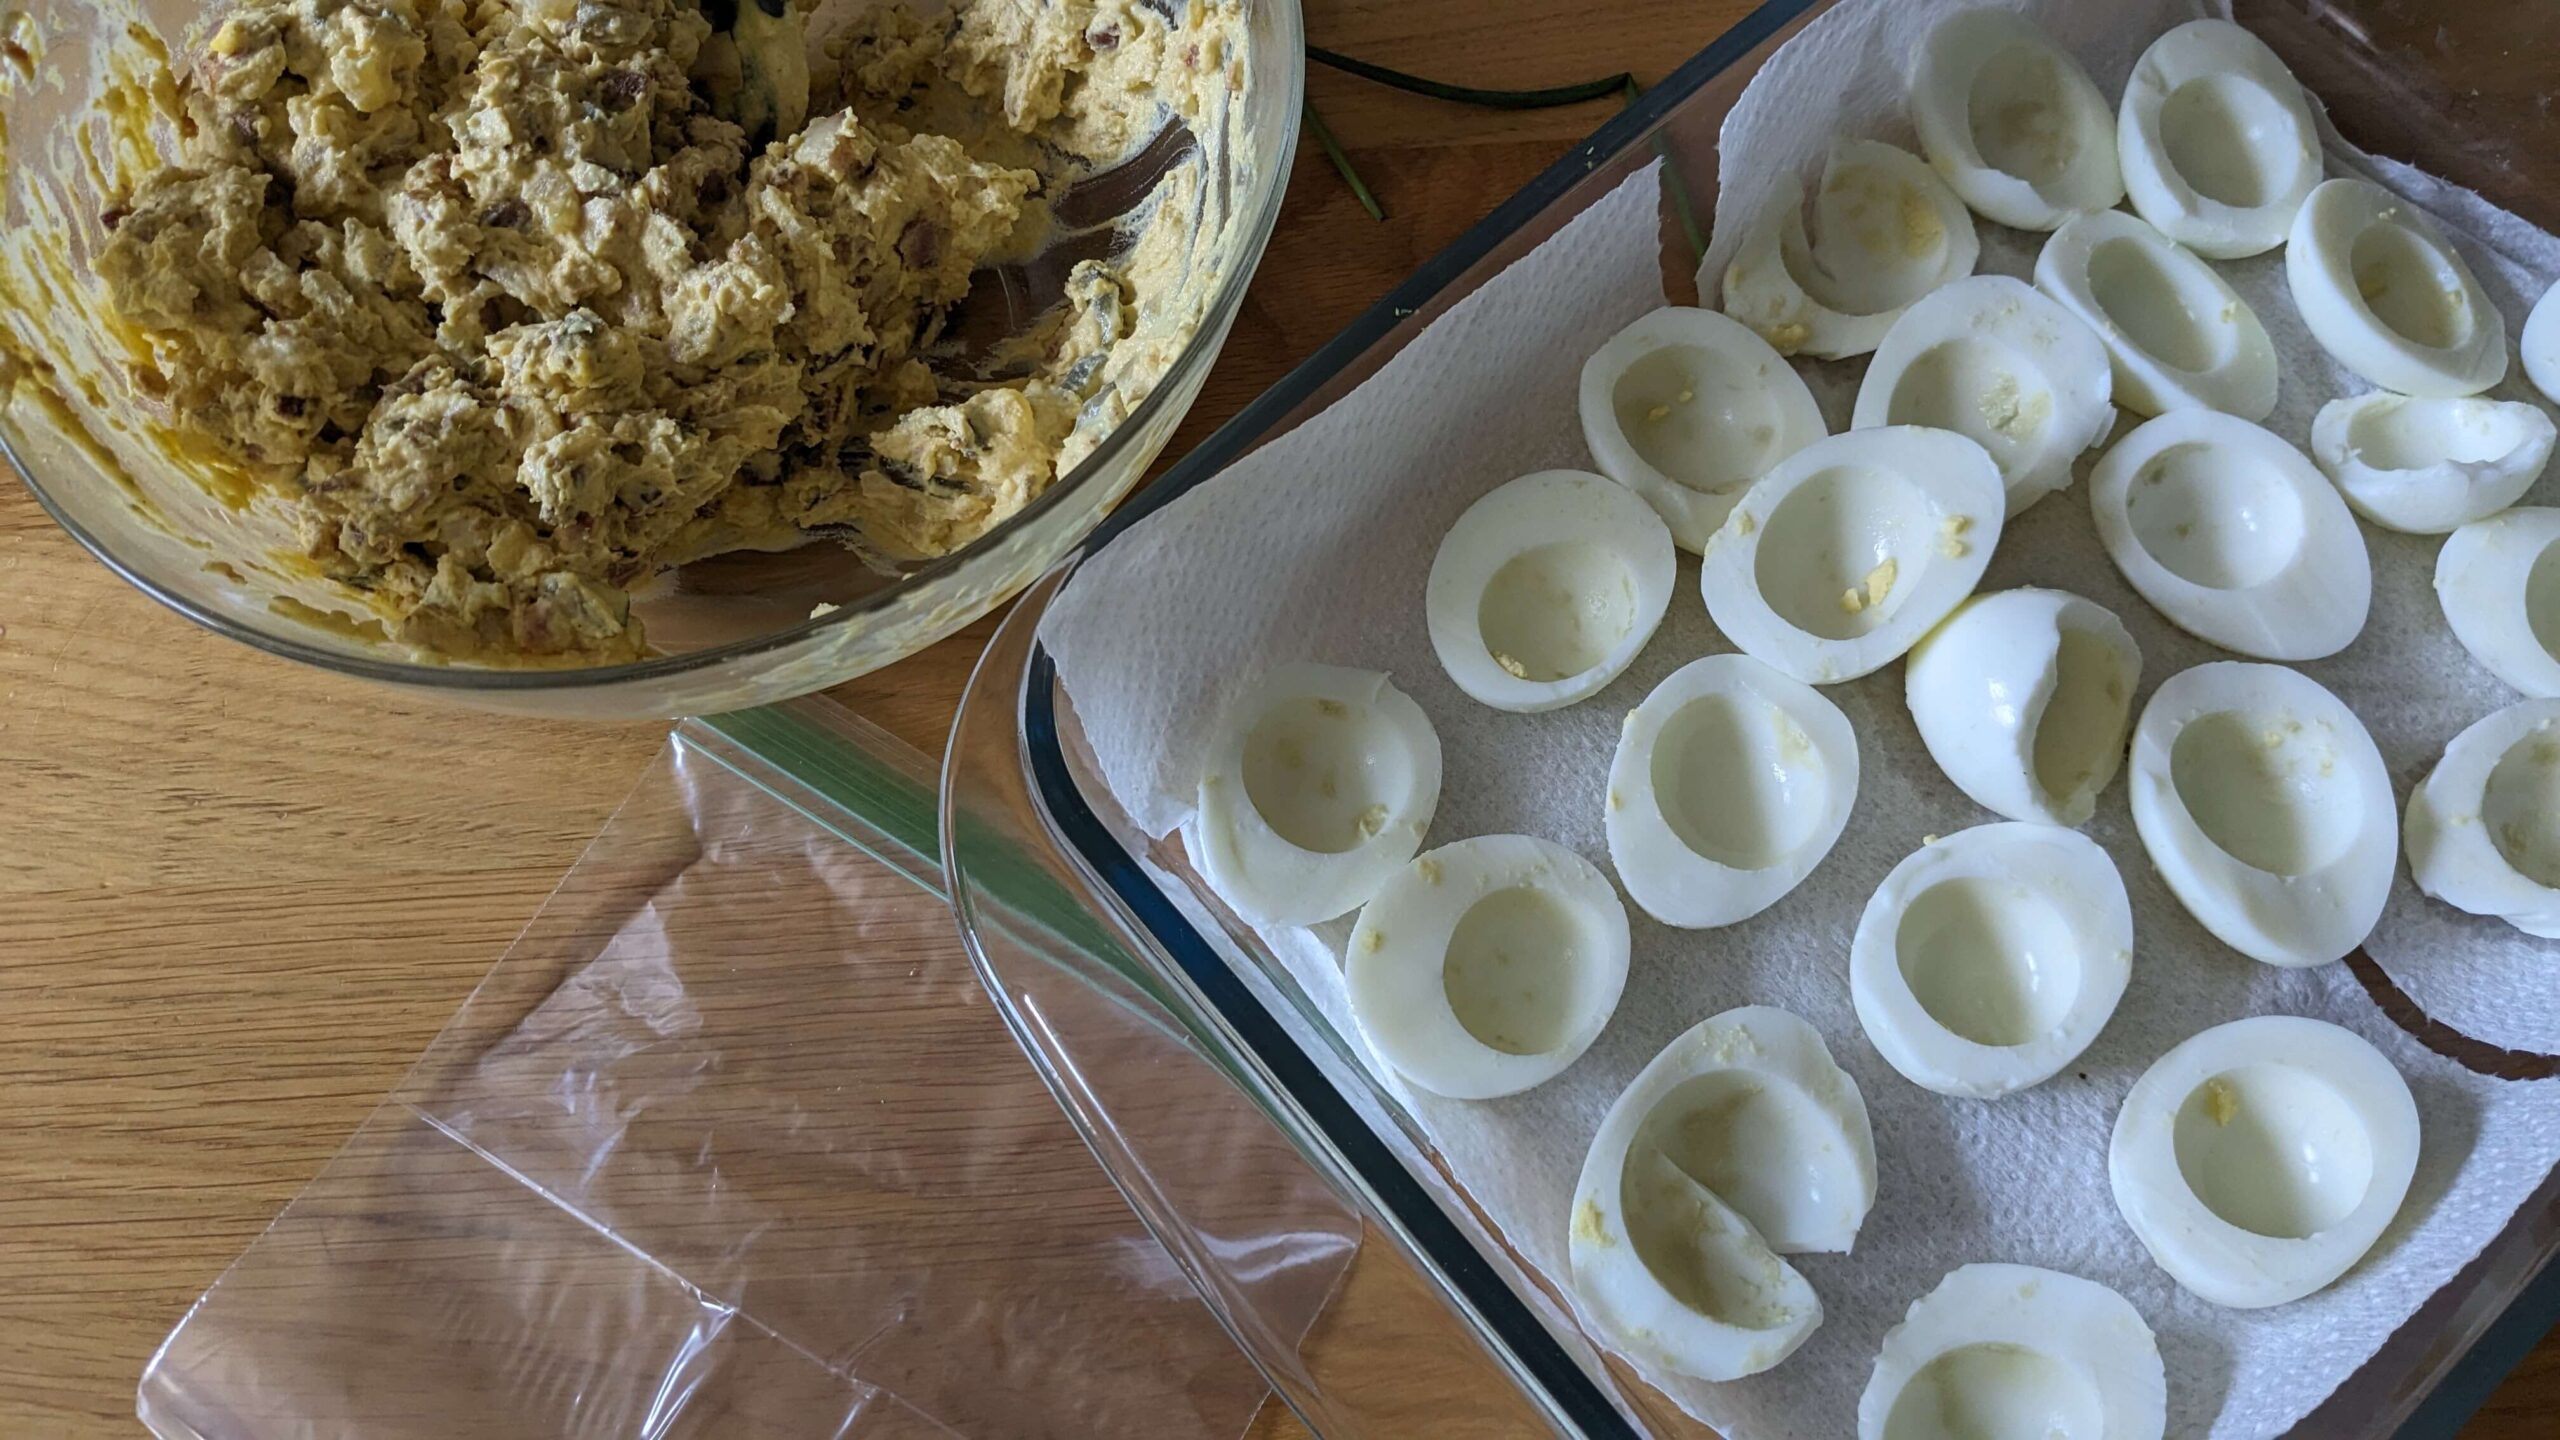 glass bowl of deviled egg mixture next to a tray of hard boiled egg white halves and a ziplock bag